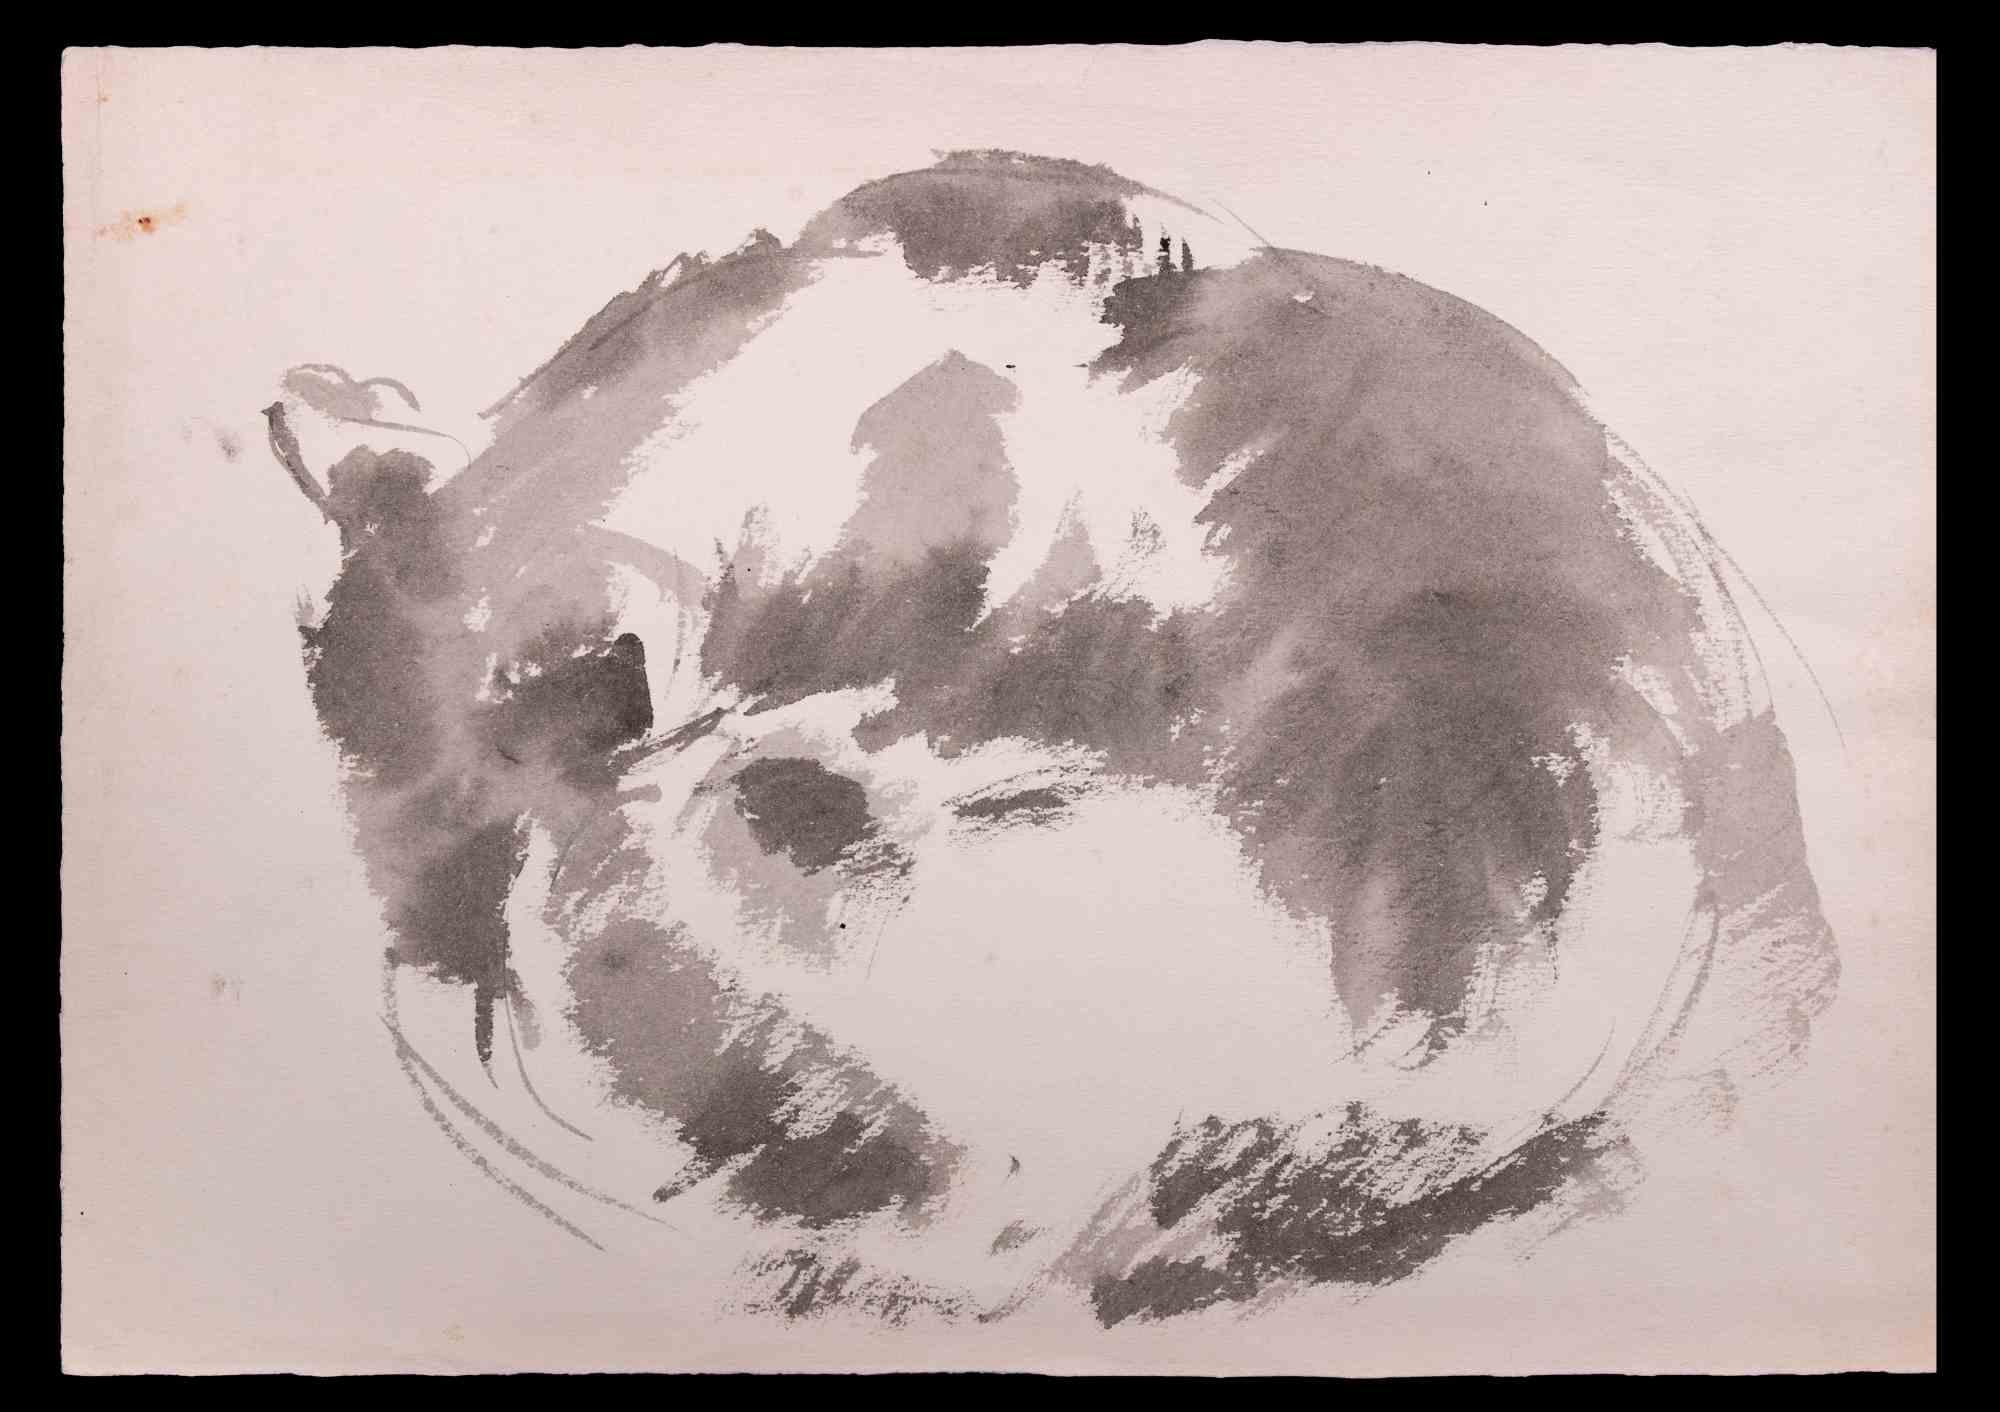 Sleeping Cat - Carbon Pencil and Watercolor by Giselle Halff - 1960